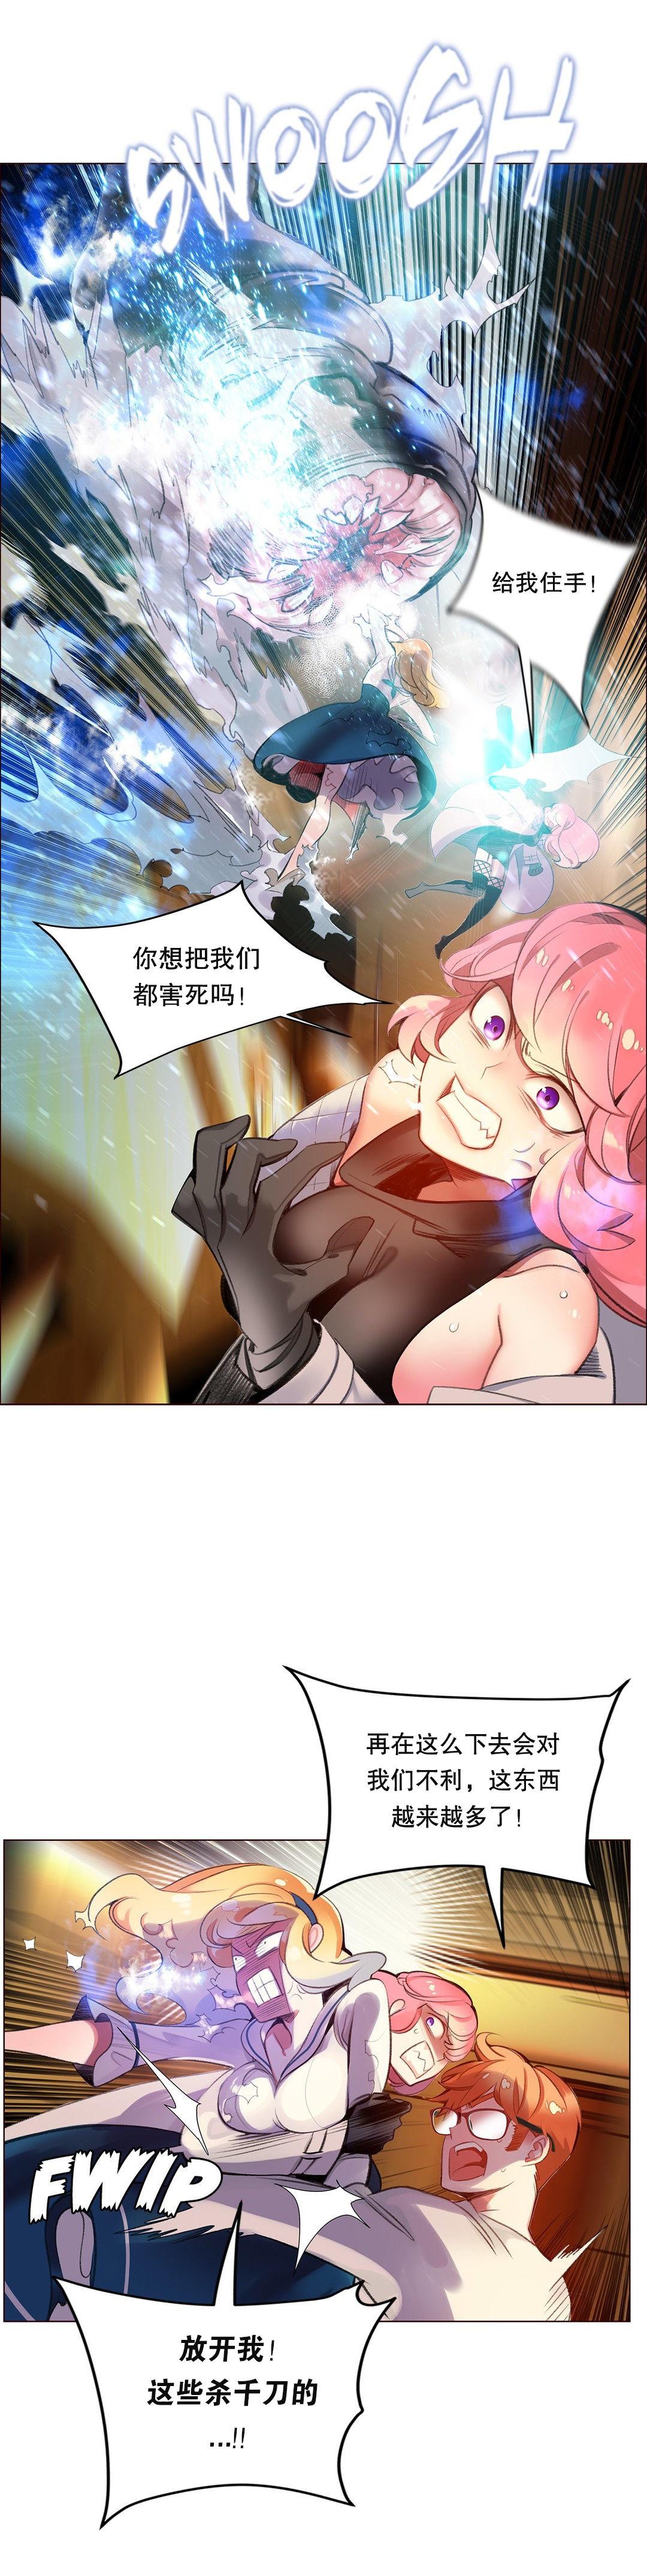 [Juder] Lilith`s Cord (第二季) Ch.61-65 [Chinese] [aaatwist个人汉化] [Ongoing] 164